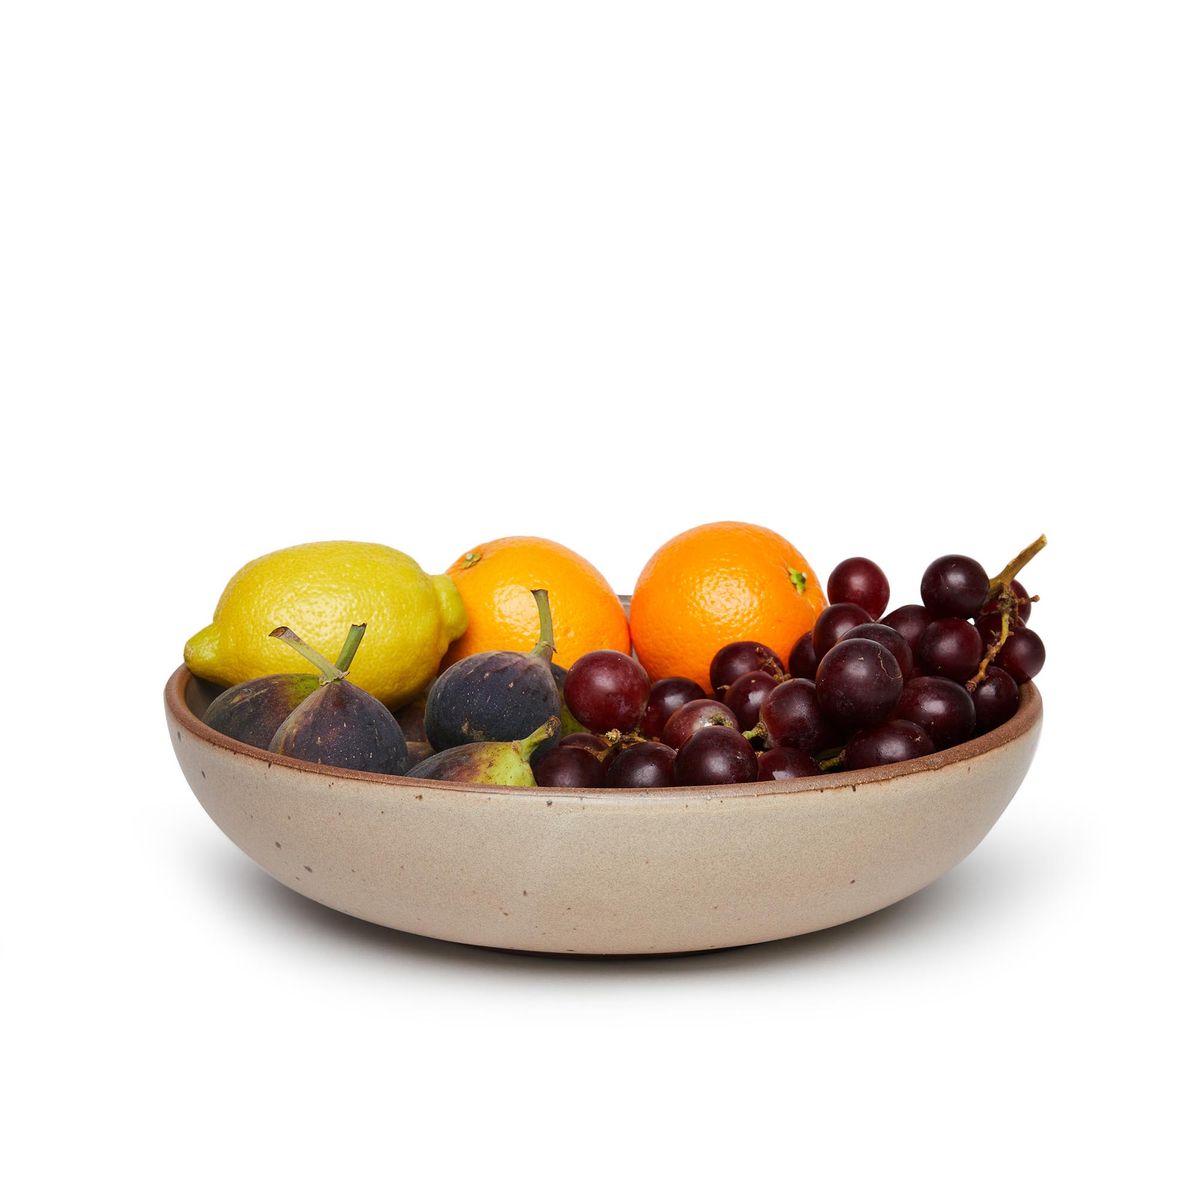 A large shallow serving ceramic bowl in a warm pale brown color featuring iron speckles and an unglazed rim, with a fruit medley